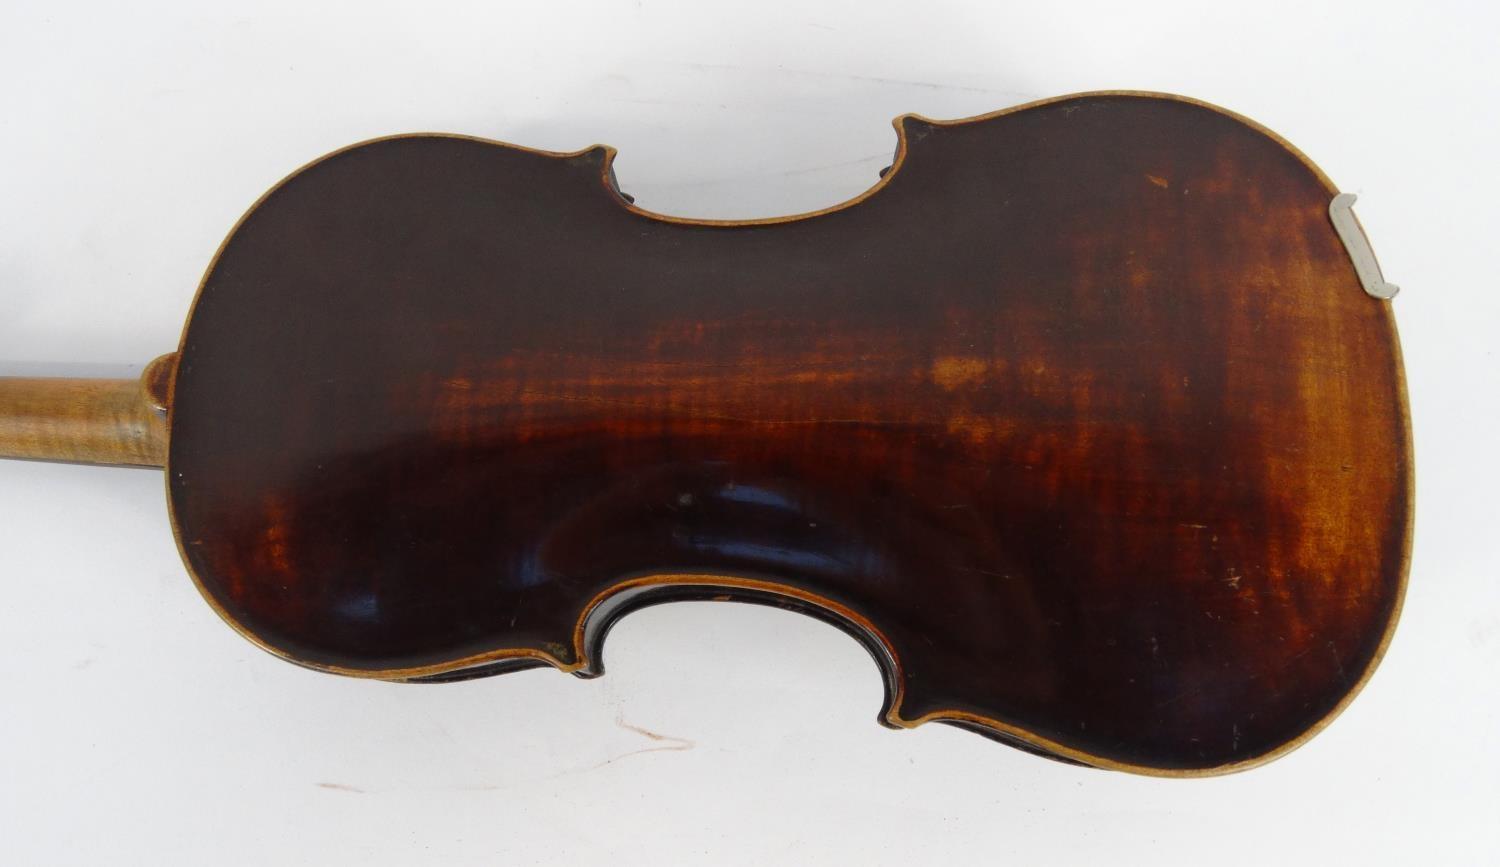 Old wooden violin and a bow with mother of pearl frog, the violin 59cm long - Image 13 of 20